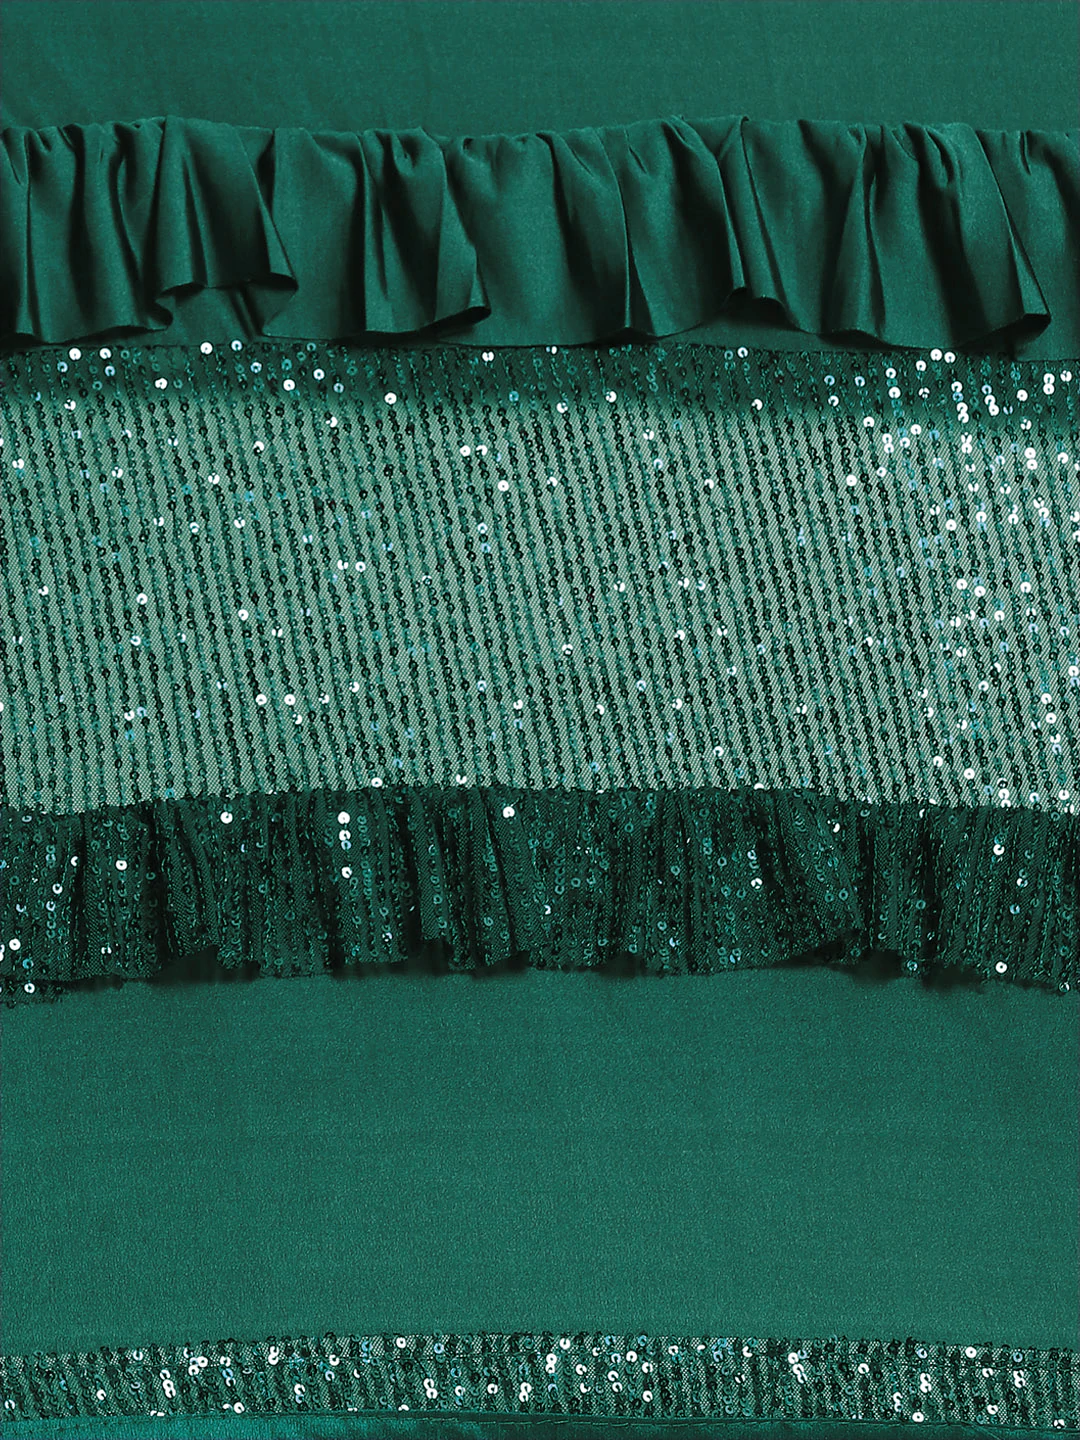 Deep Green Bling Lycra Ruffled Saree with Festive Layering & Sequence Sheet Embroidery